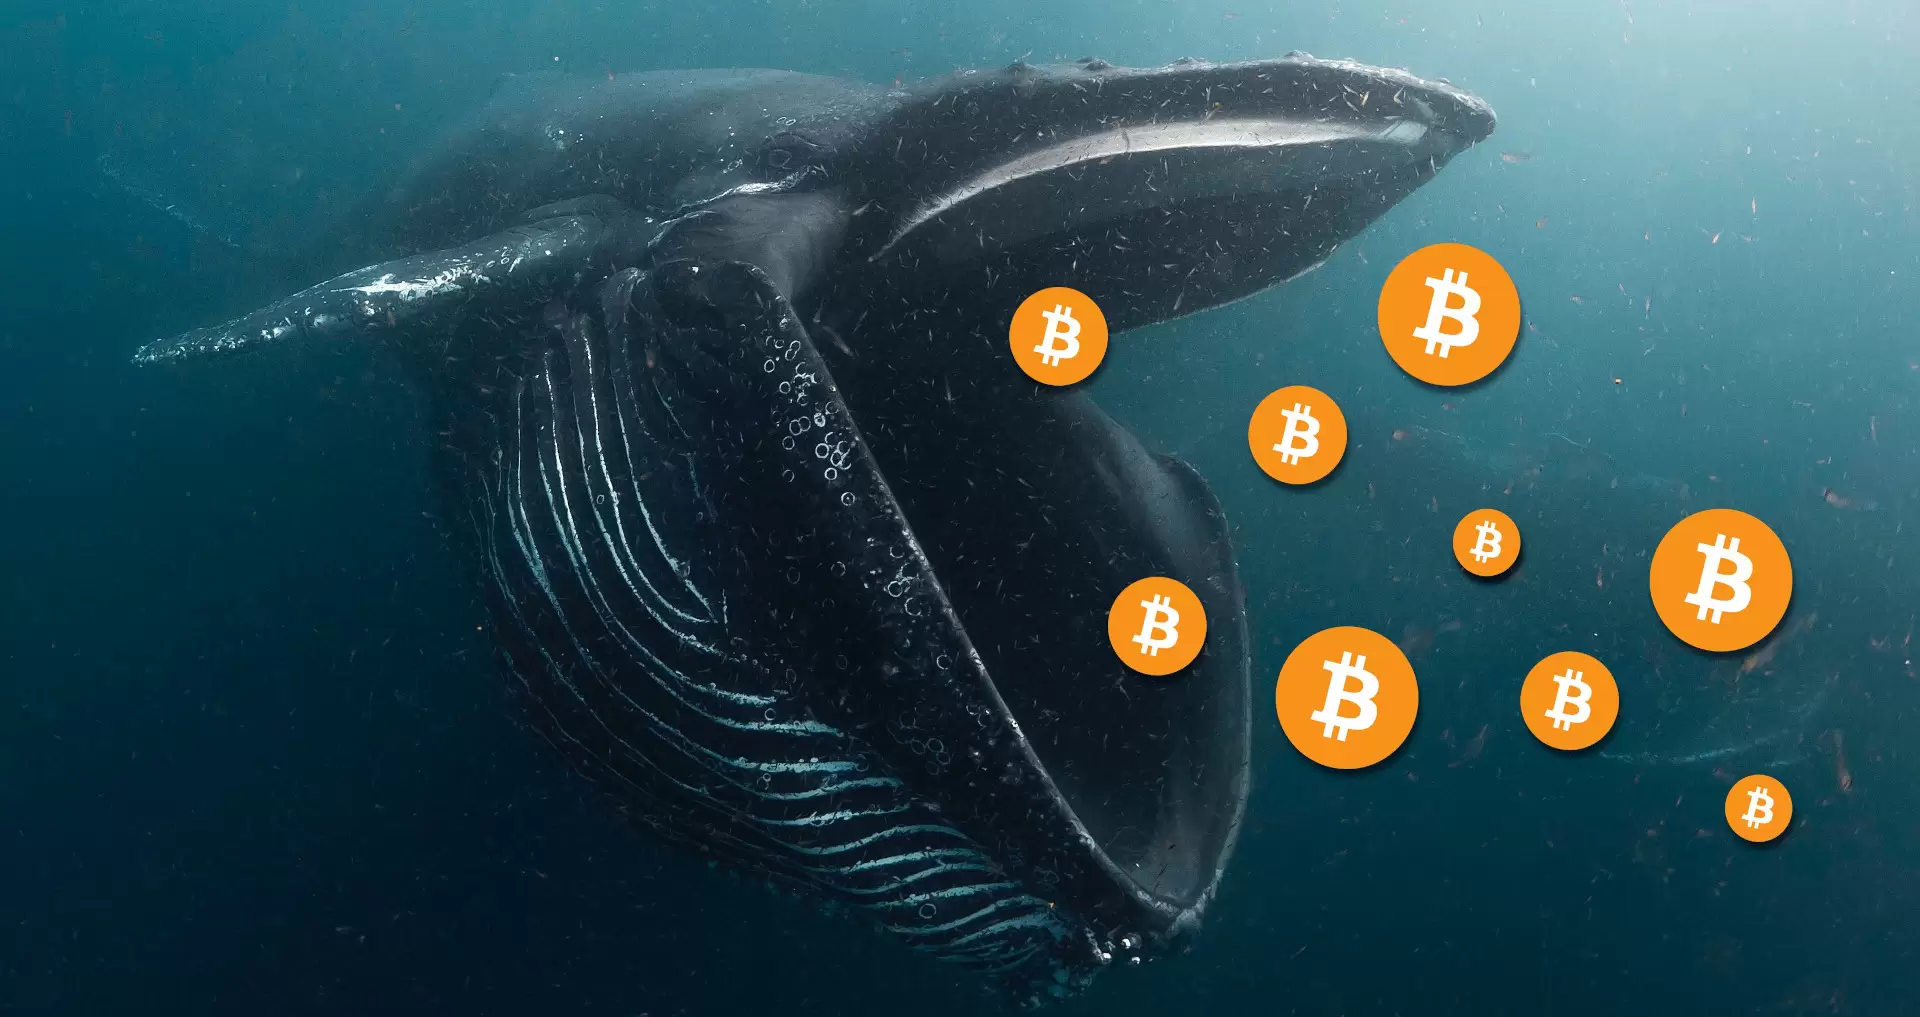 A Whale Transferred 2650 Bitcoins 1024 Million to the Cryptocurrency